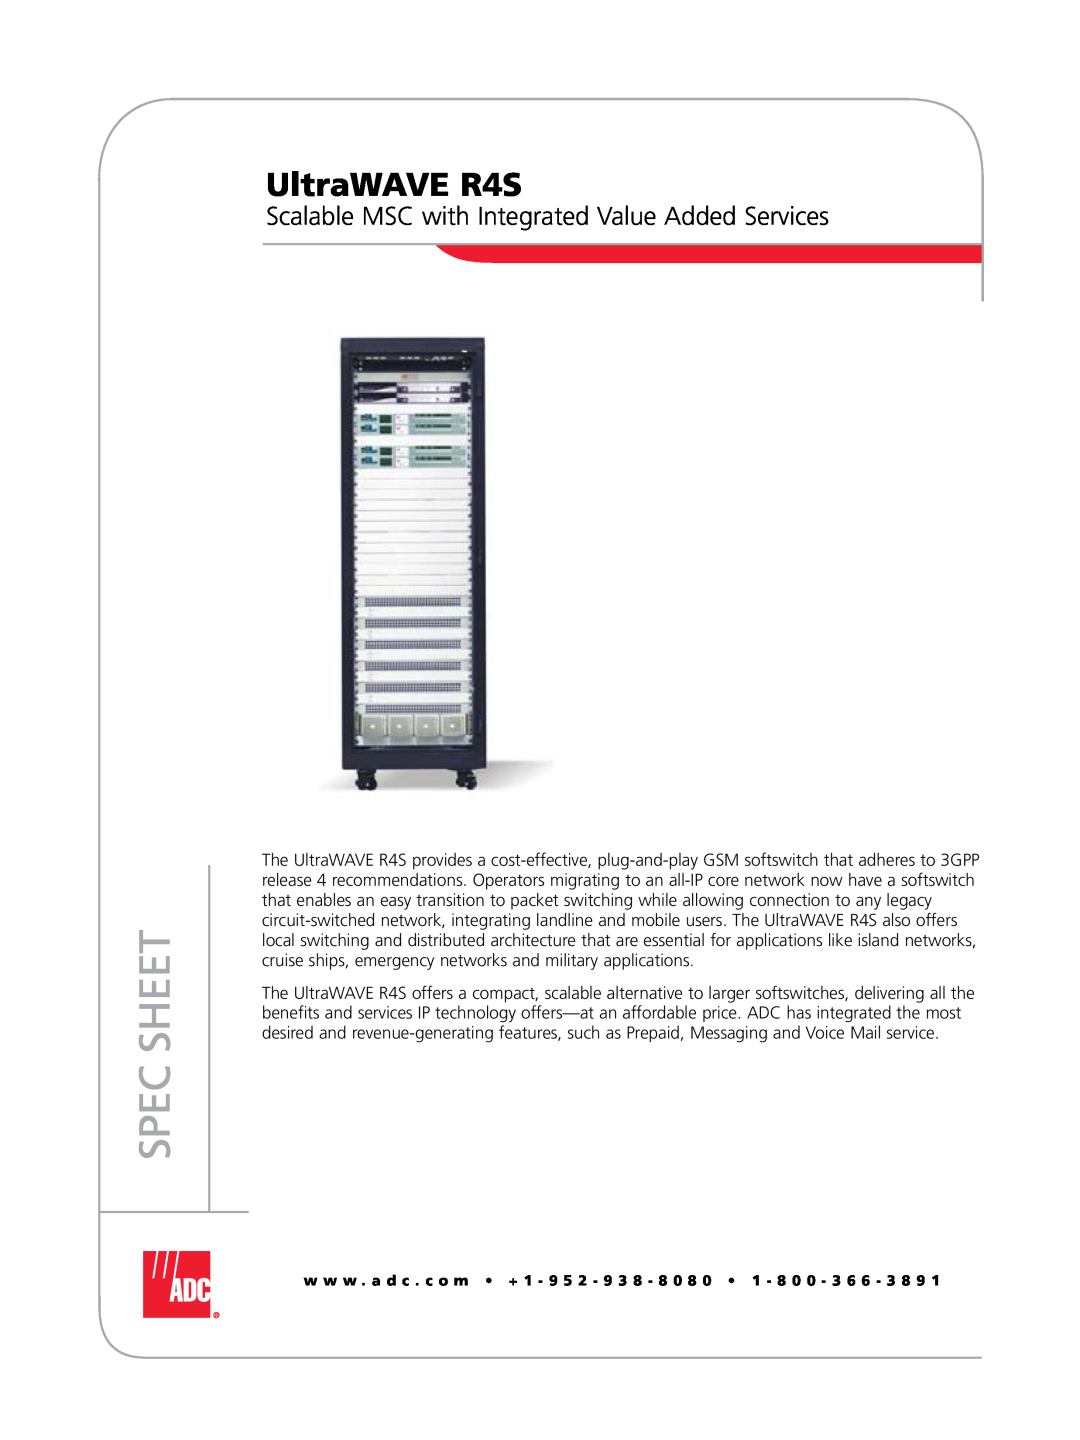 ADC manual UltraWAVE R4S, Scalable MSC with Integrated Value Added Services, Spec Sheet 